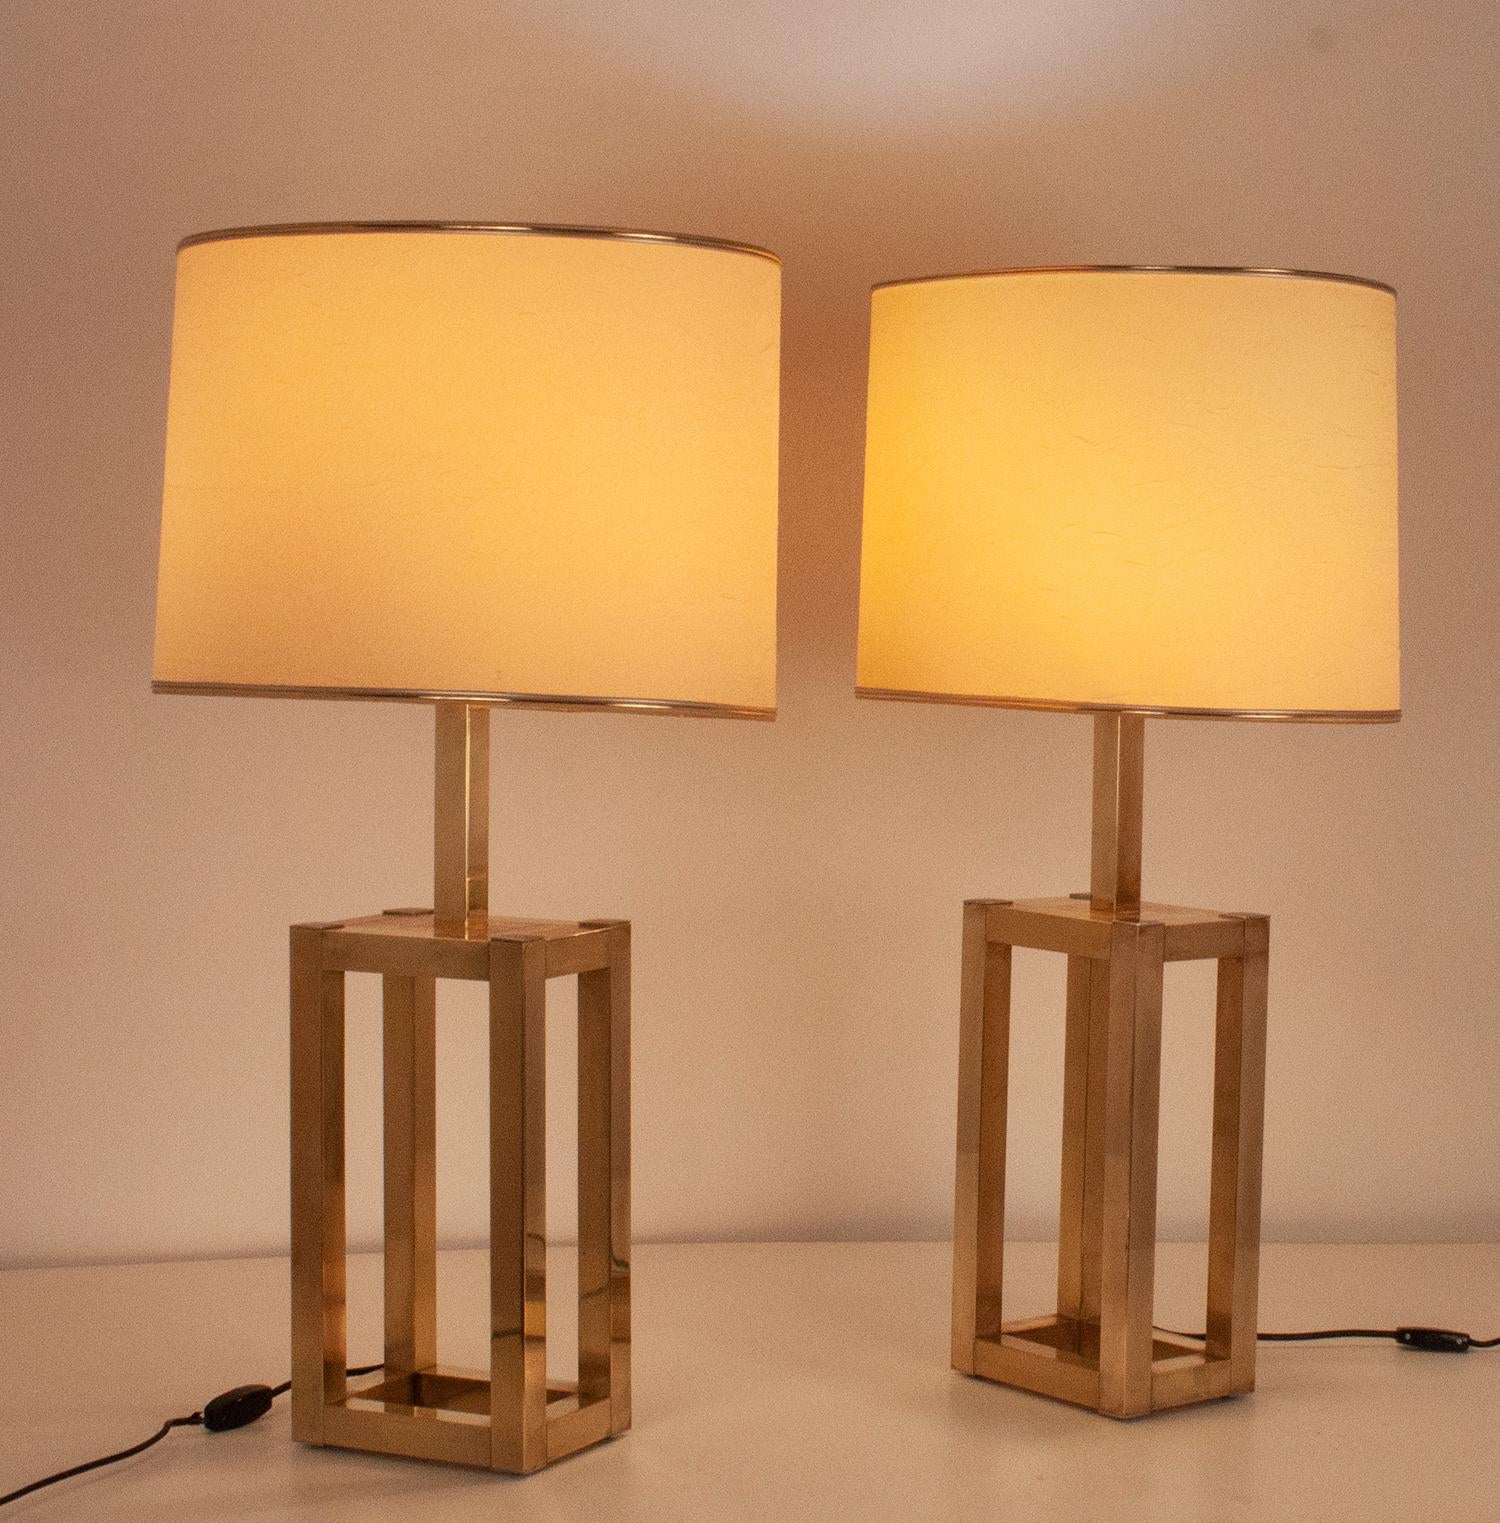 Large Midcentury Pair of Table Lamps by Willy Rizzo for Lumica, Spain, 1970s 1